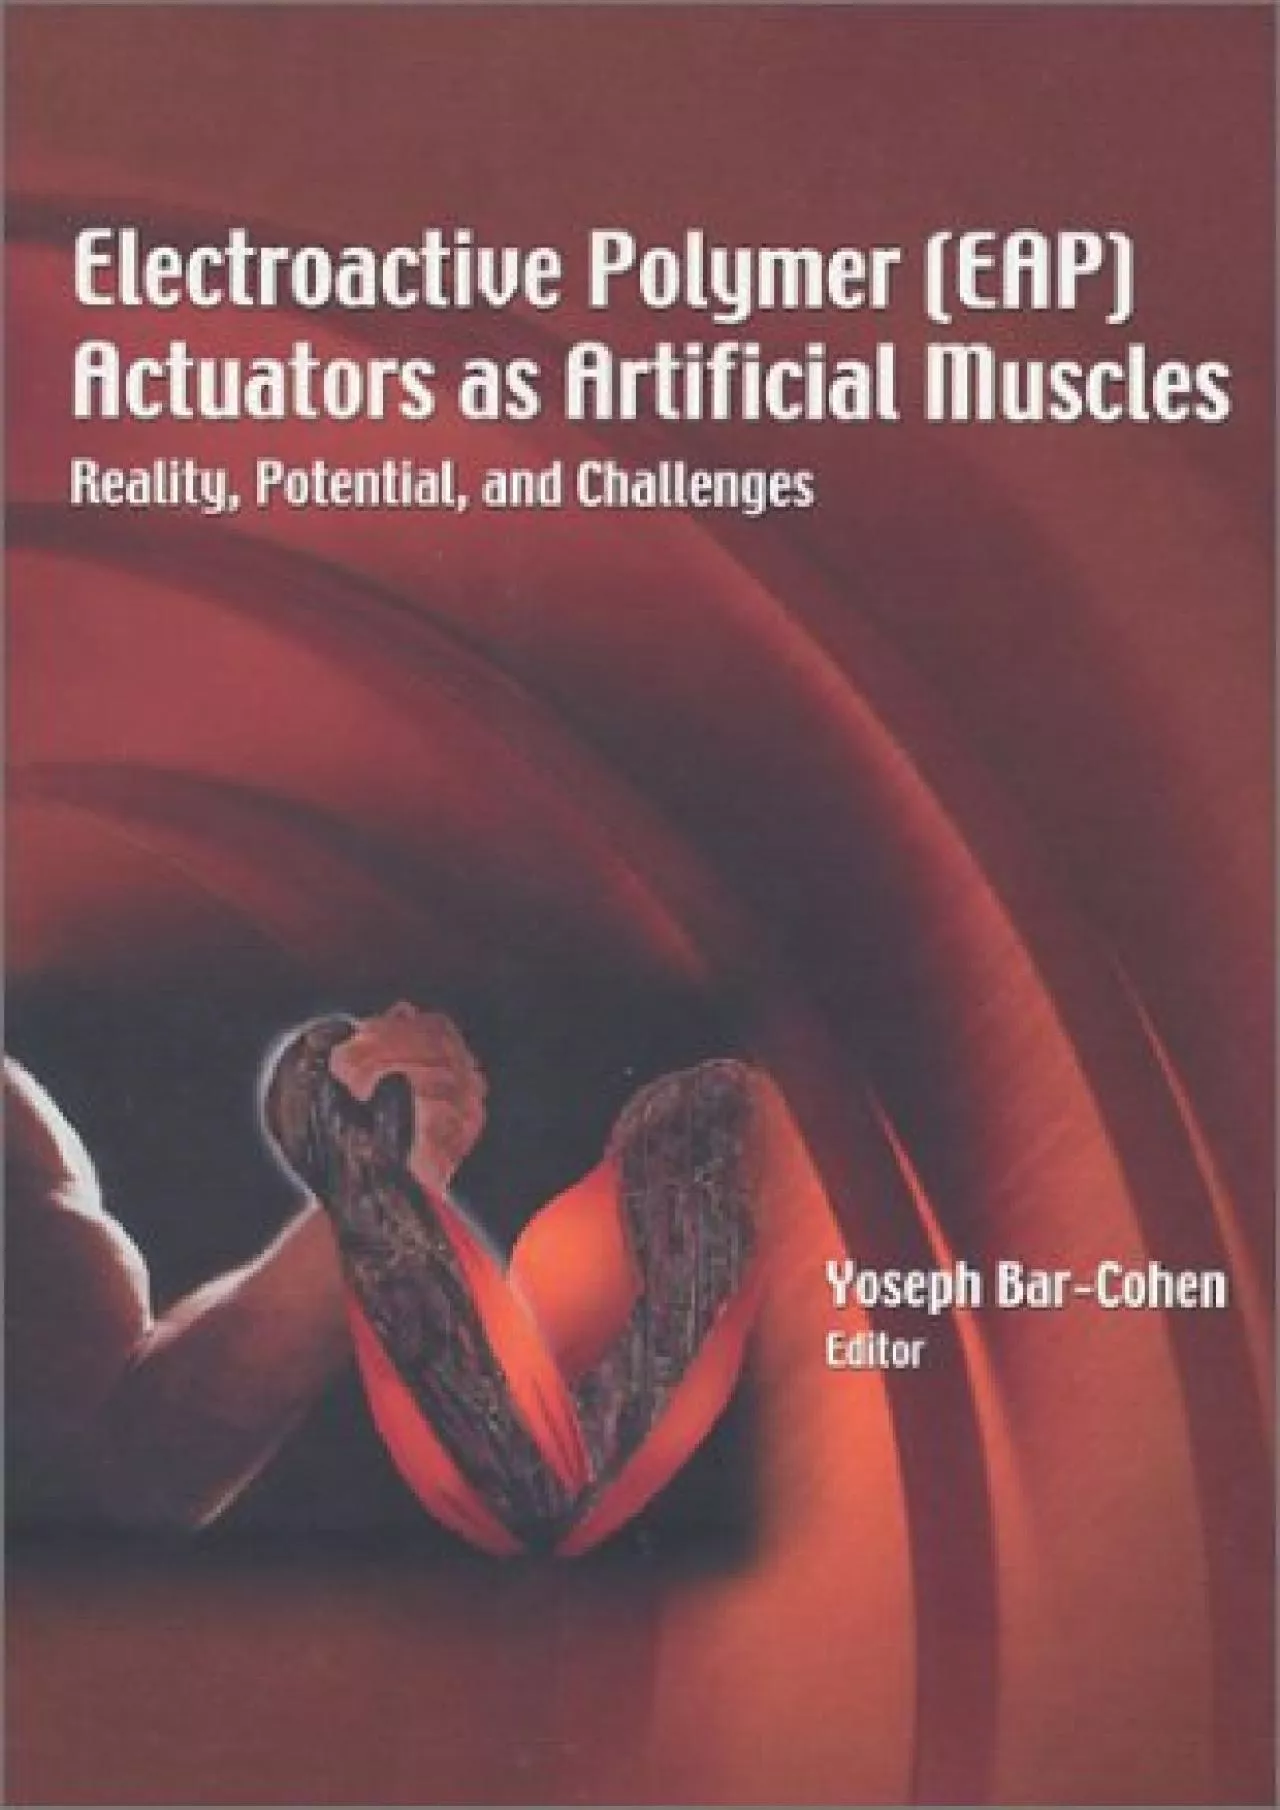 (BOOK)-Electroactive Polymer (EAP) Actuators as Artificial Muscles: Reality, Potential,